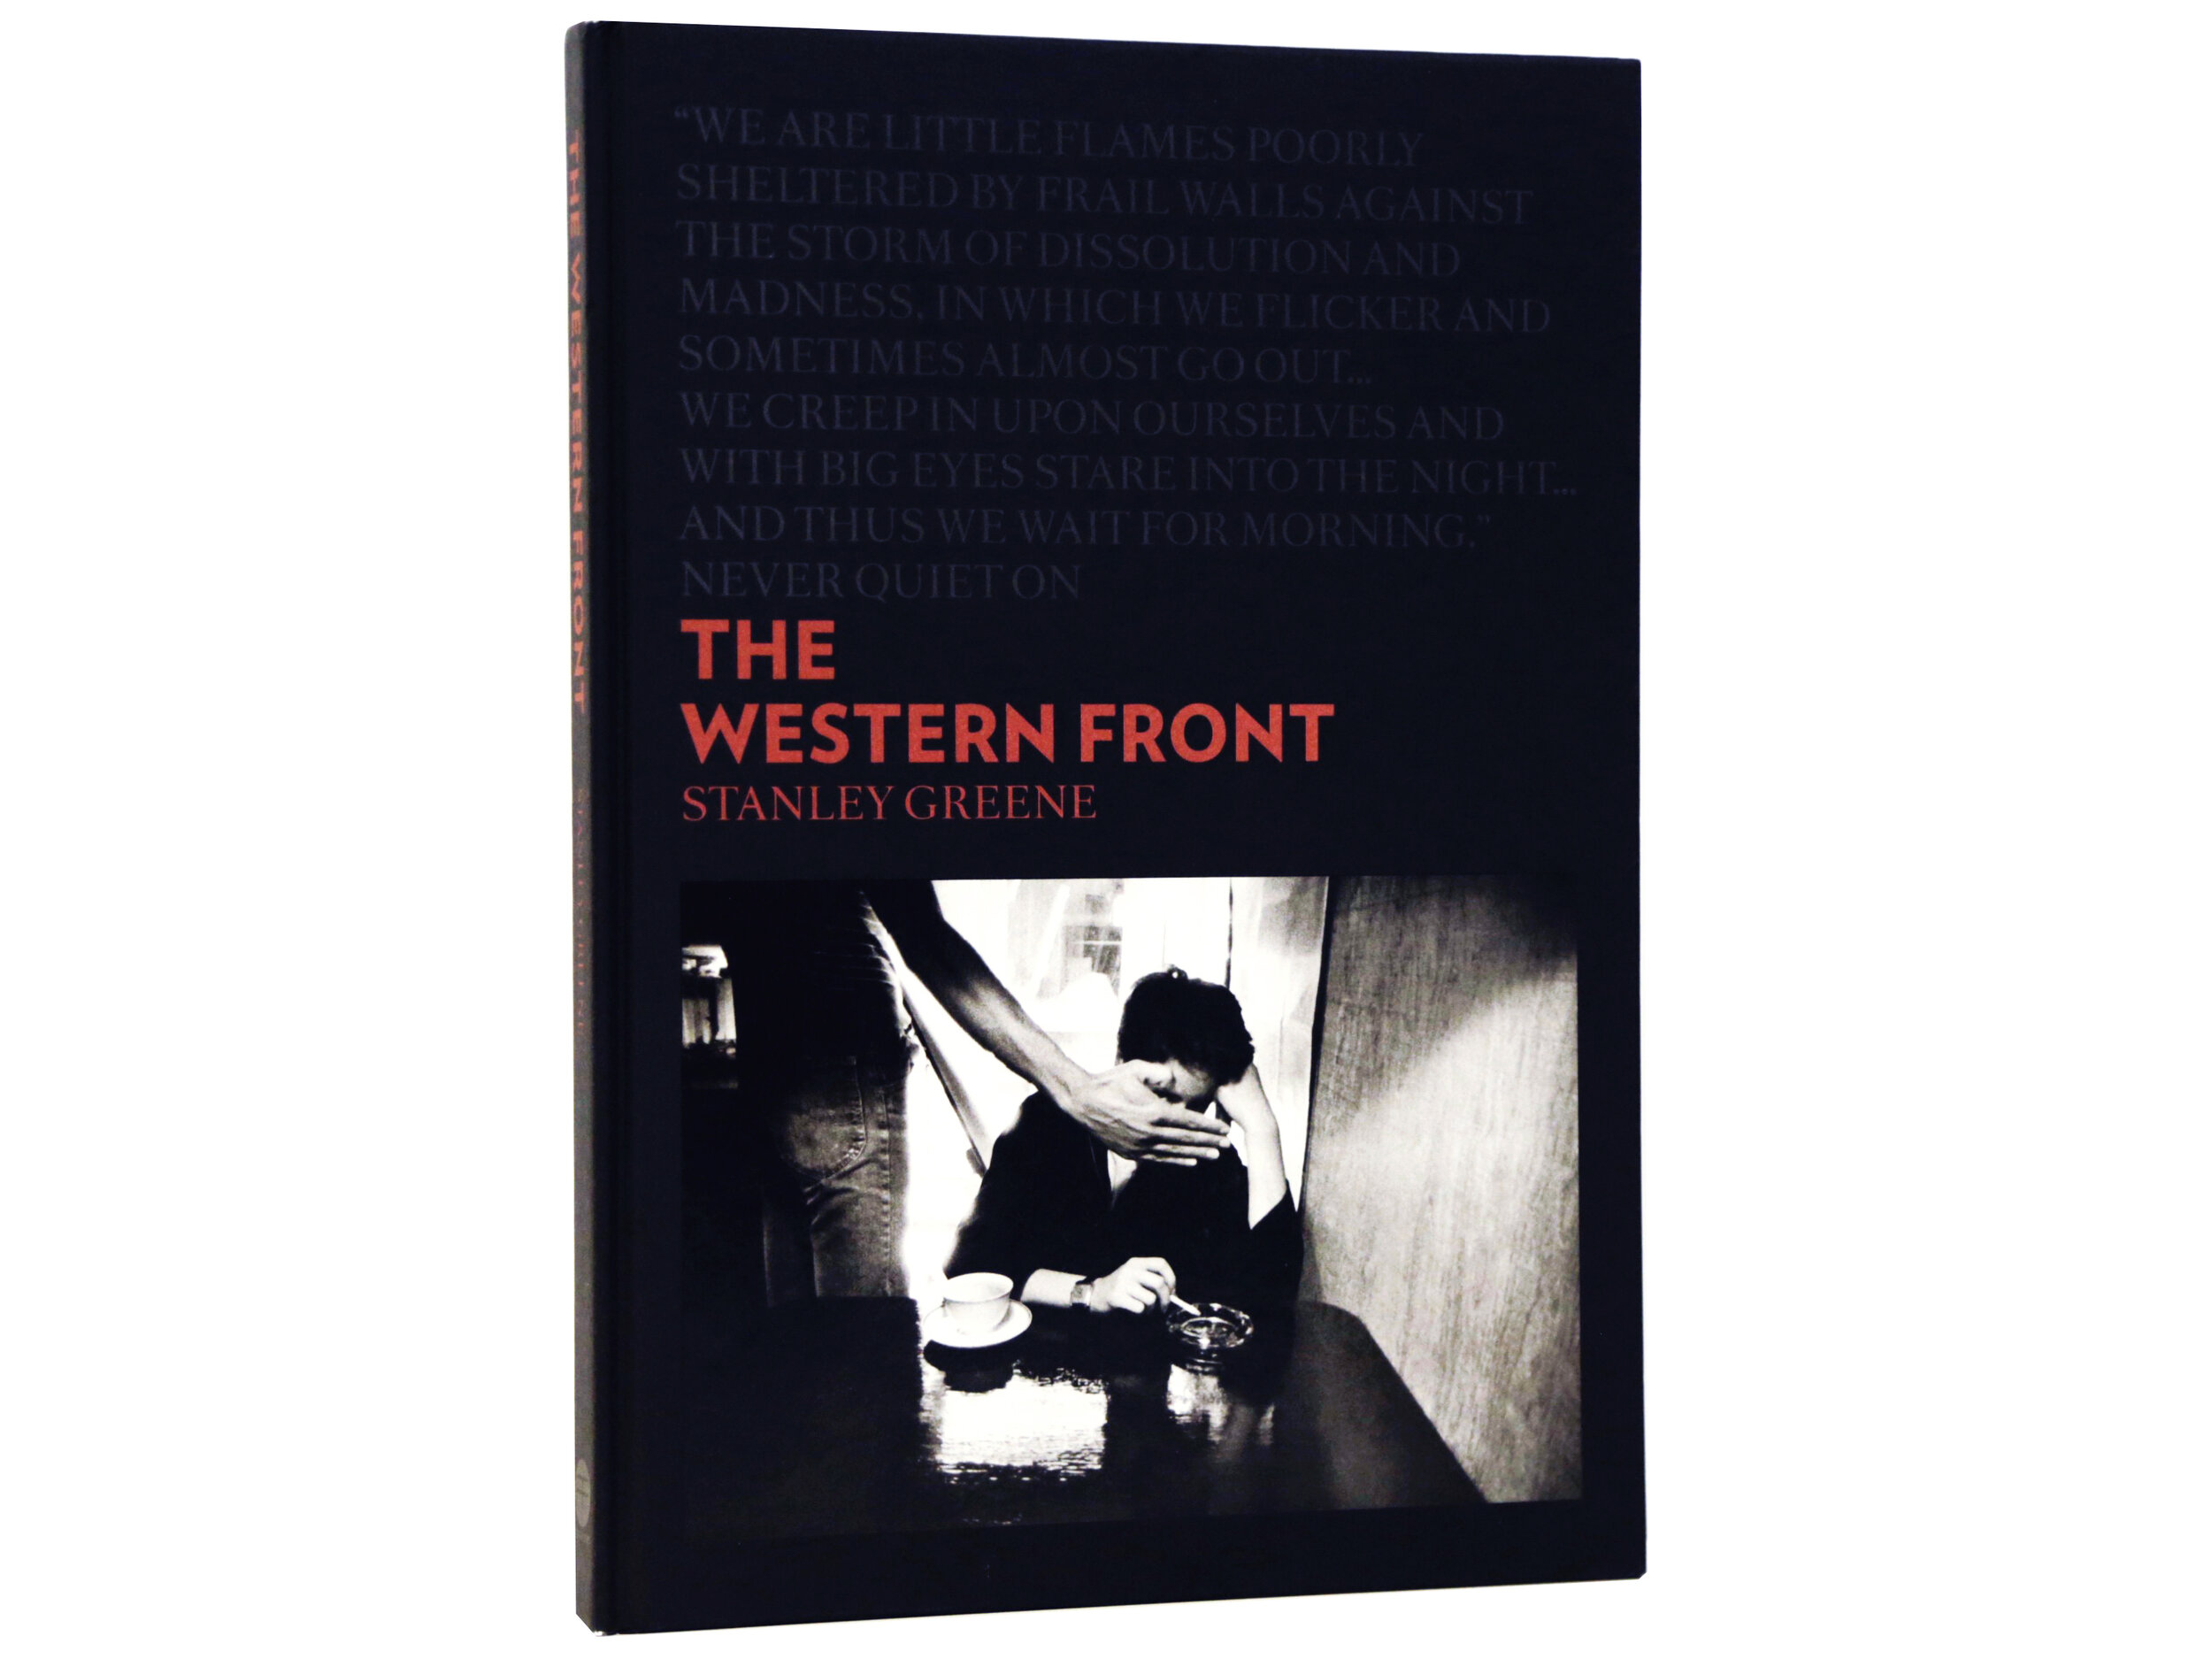 The Western Front by Stanley Greene — NOOR Images